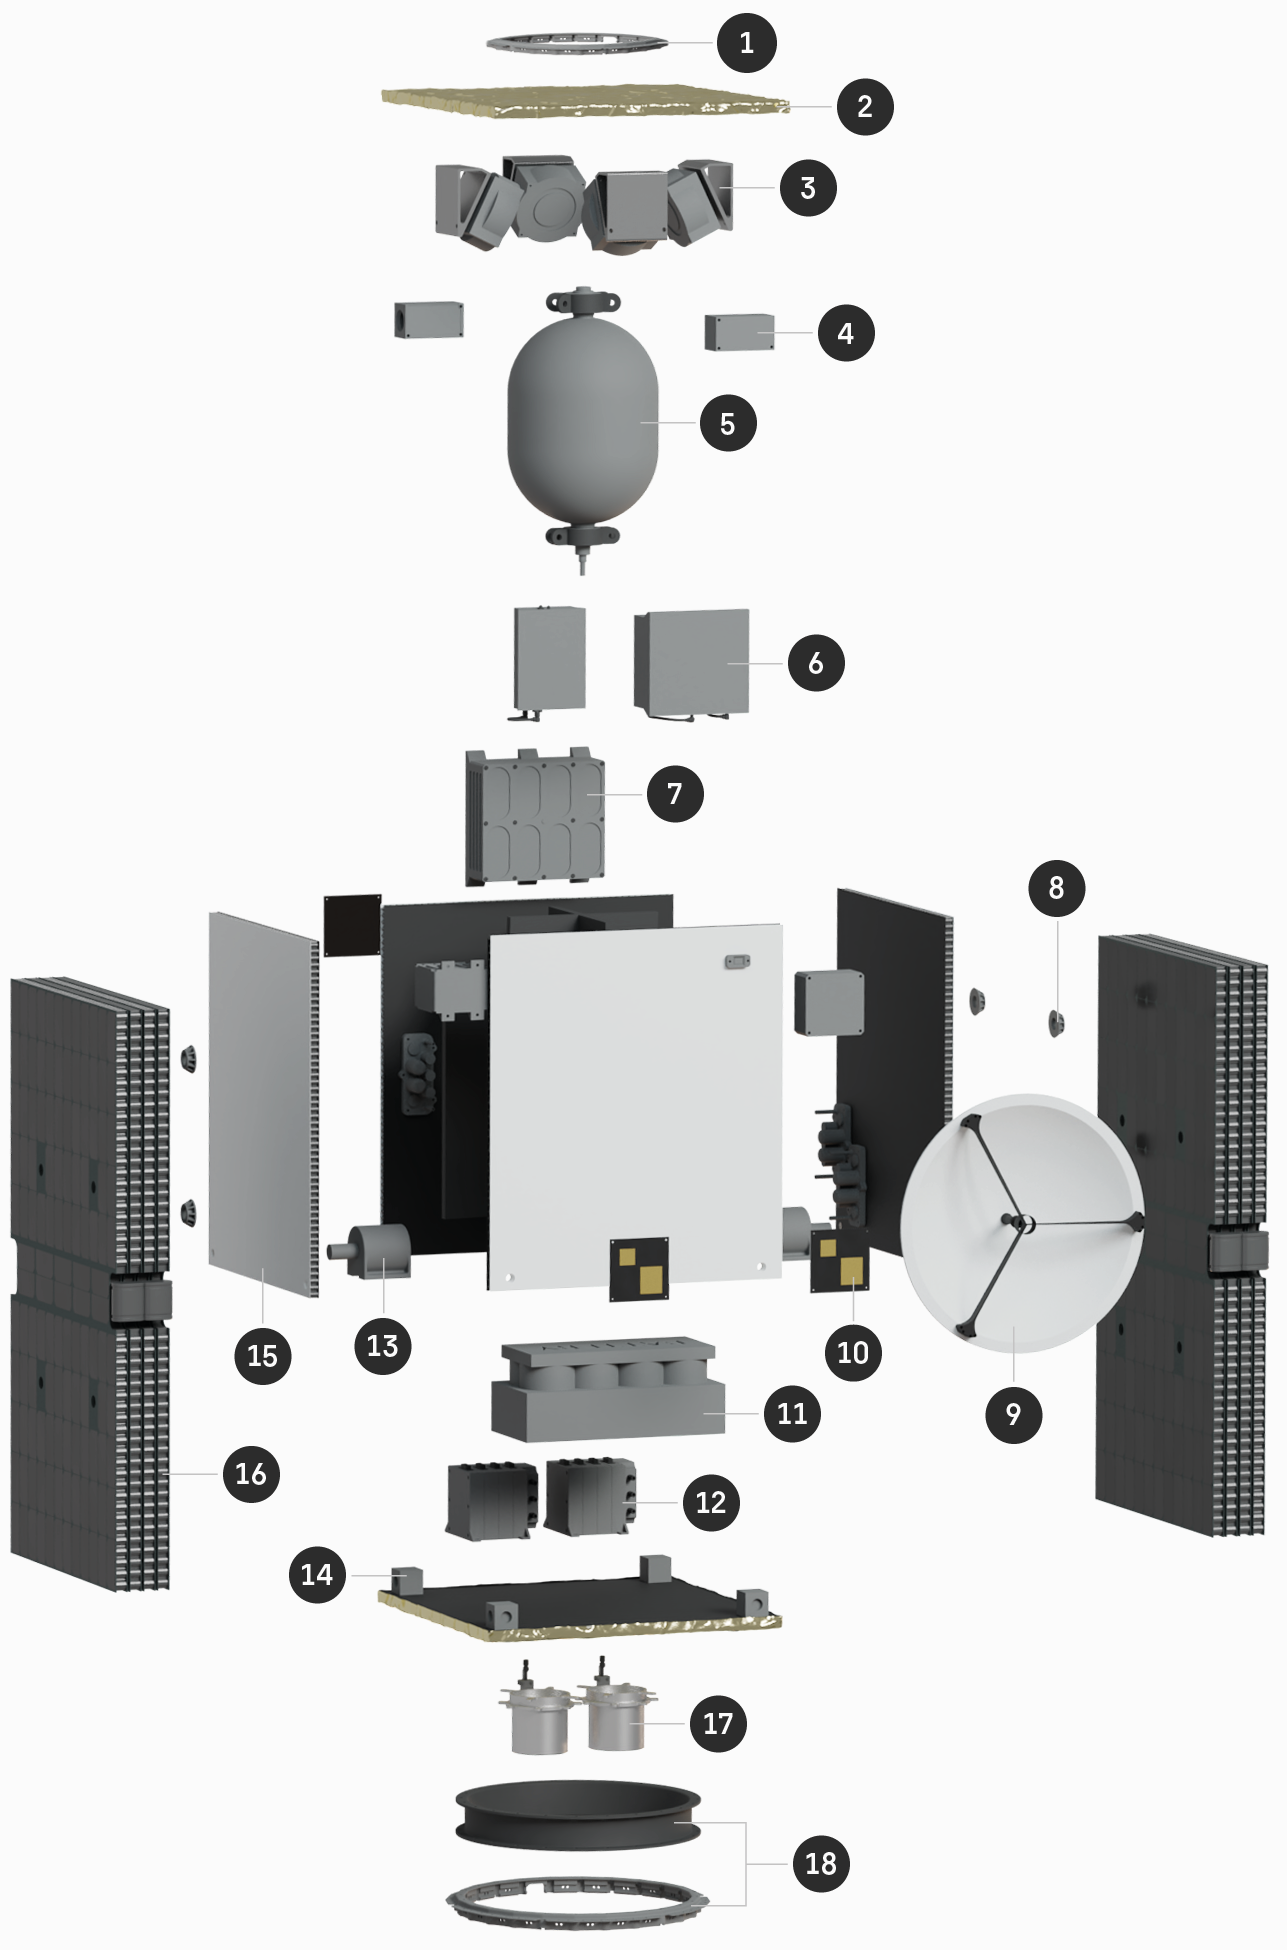 An exploding render of all main subsystems of the ESKIMO satellite, depicting the accommodation and size of certain systems in relation to the whole satellite body.